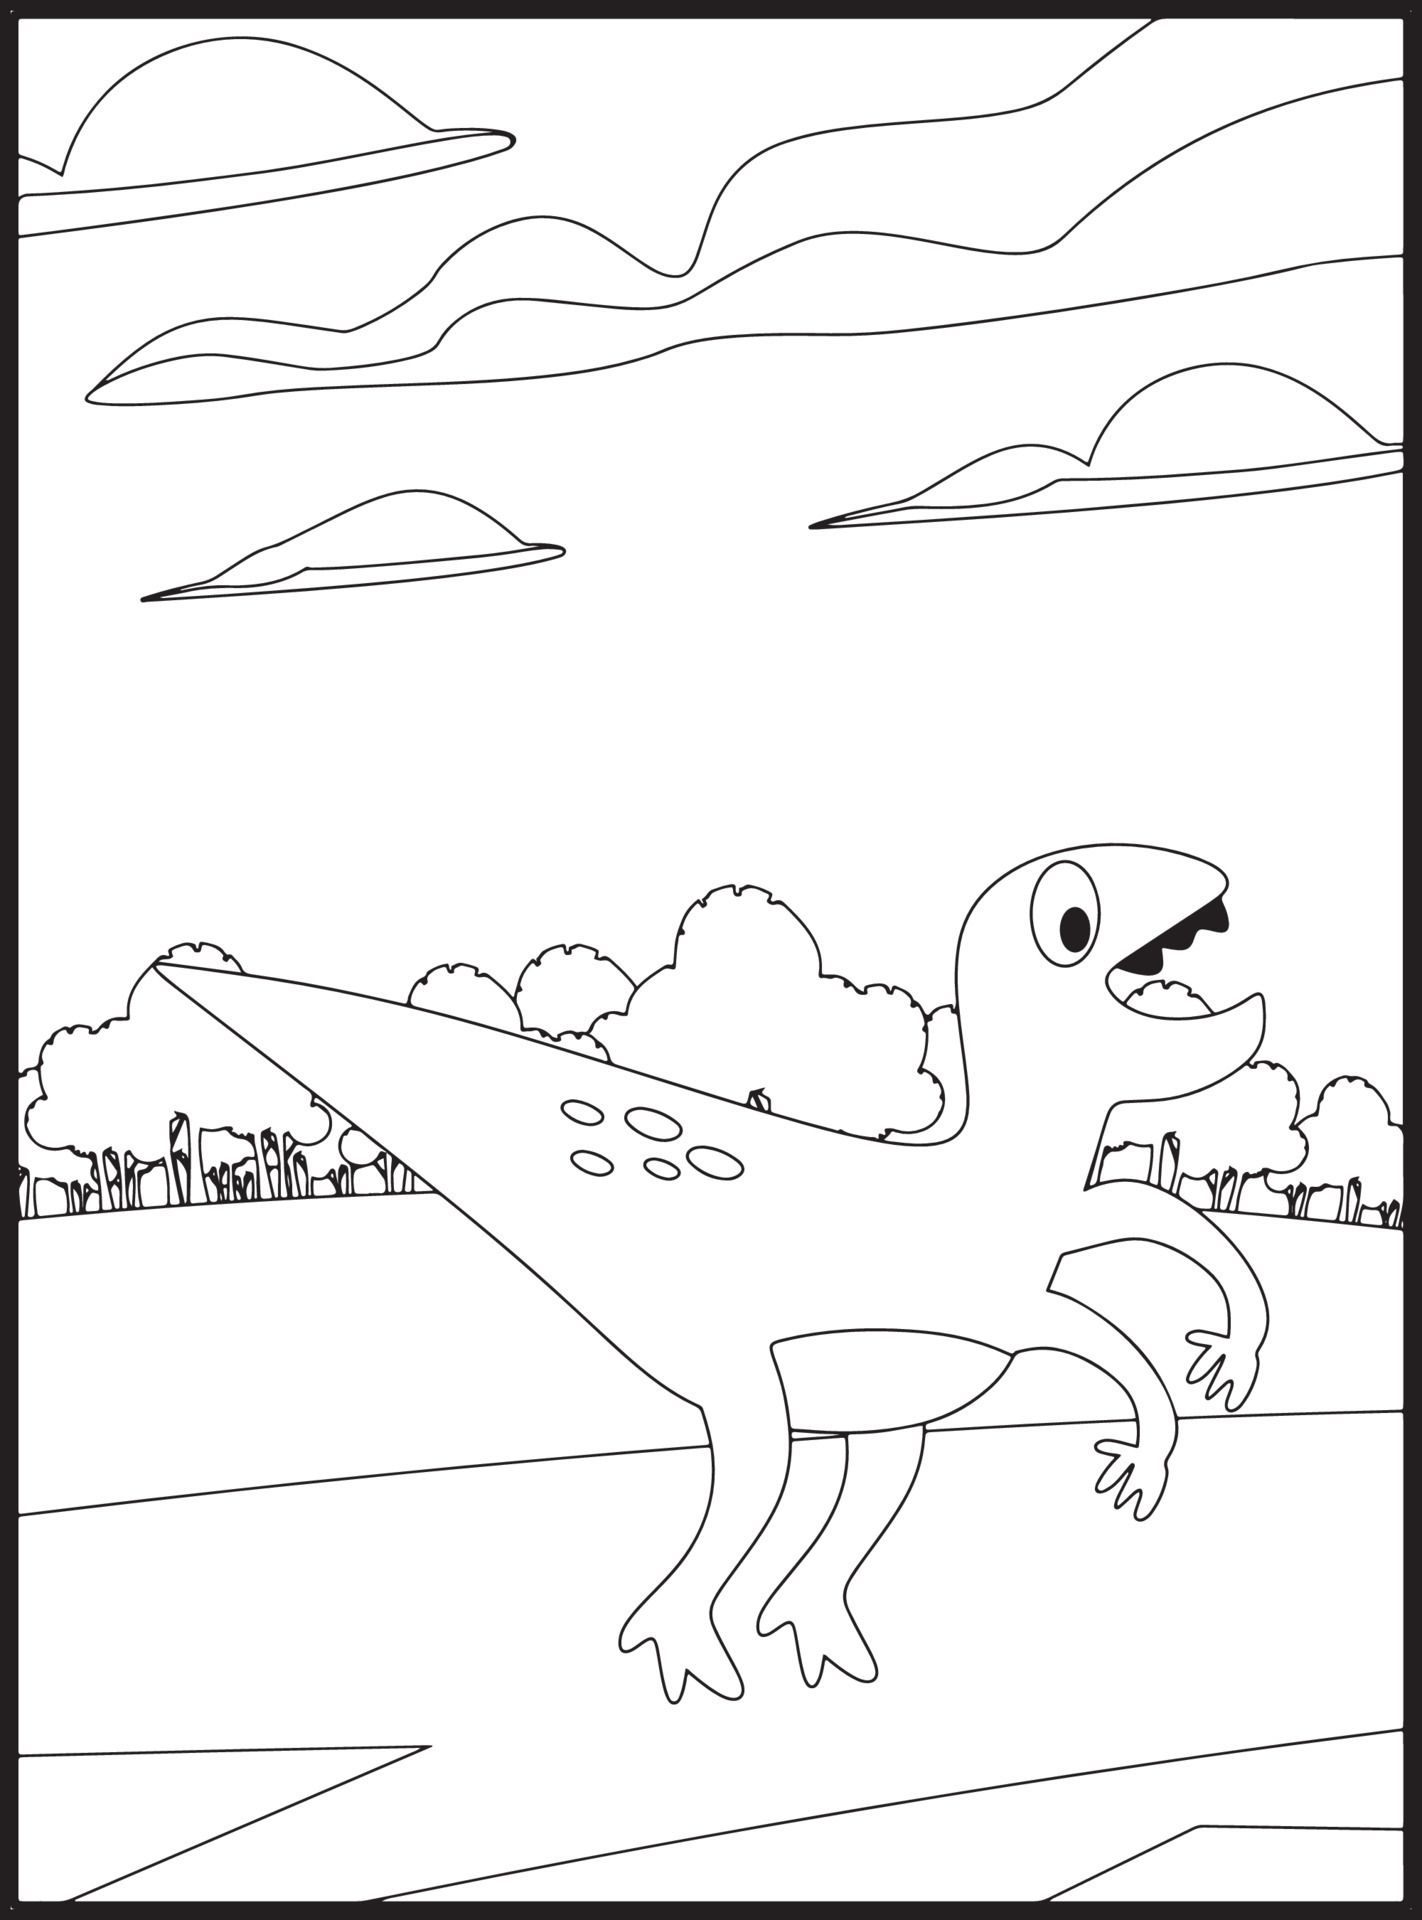 190 Cute Dinosaur Coloring Pages: Roaring Fun for Kids 72